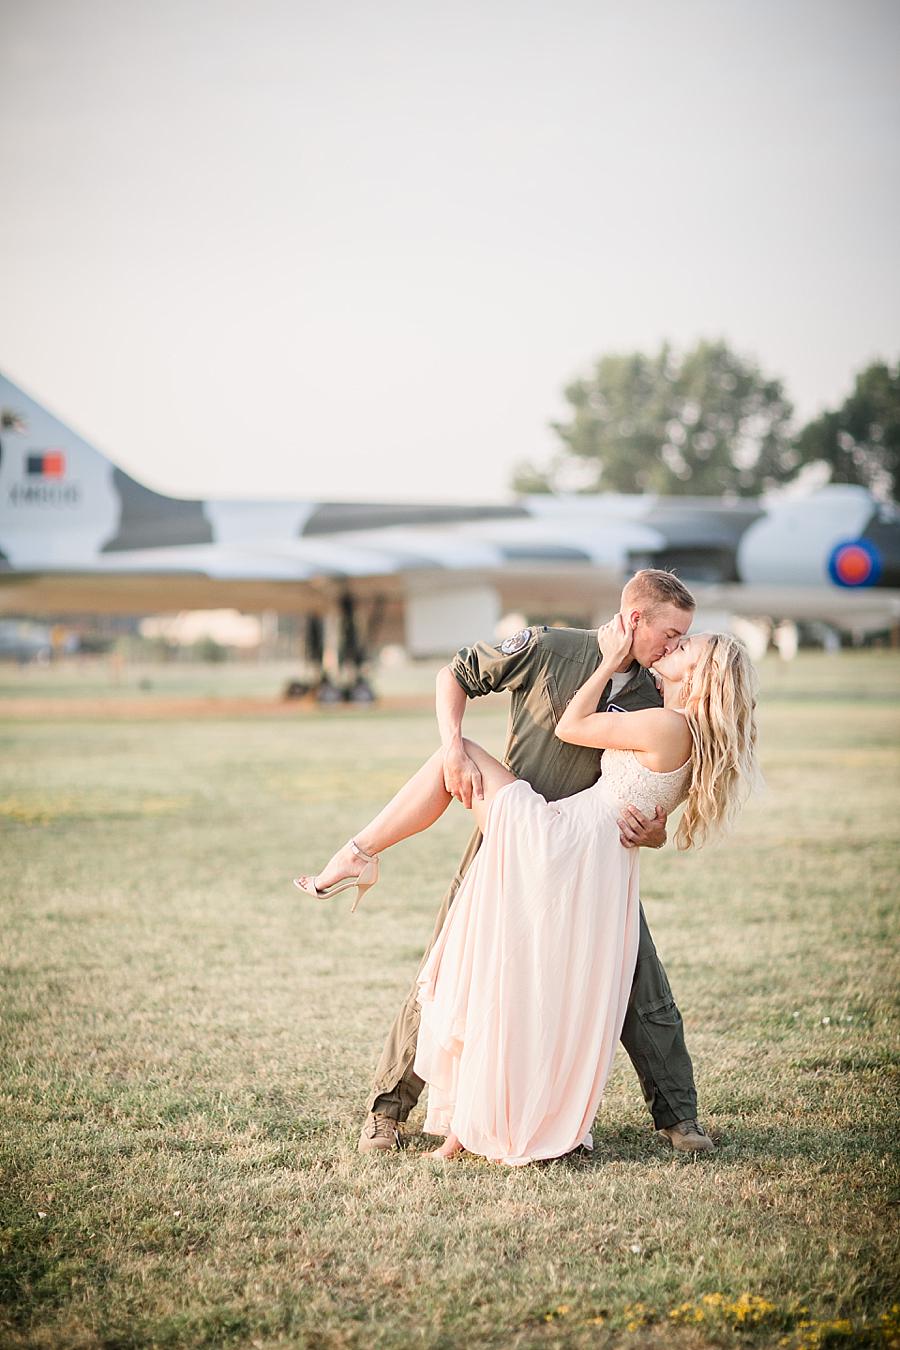 Dip kiss at this Air Force Engagement Session by Knoxville Wedding Photographer, Amanda May Photos.